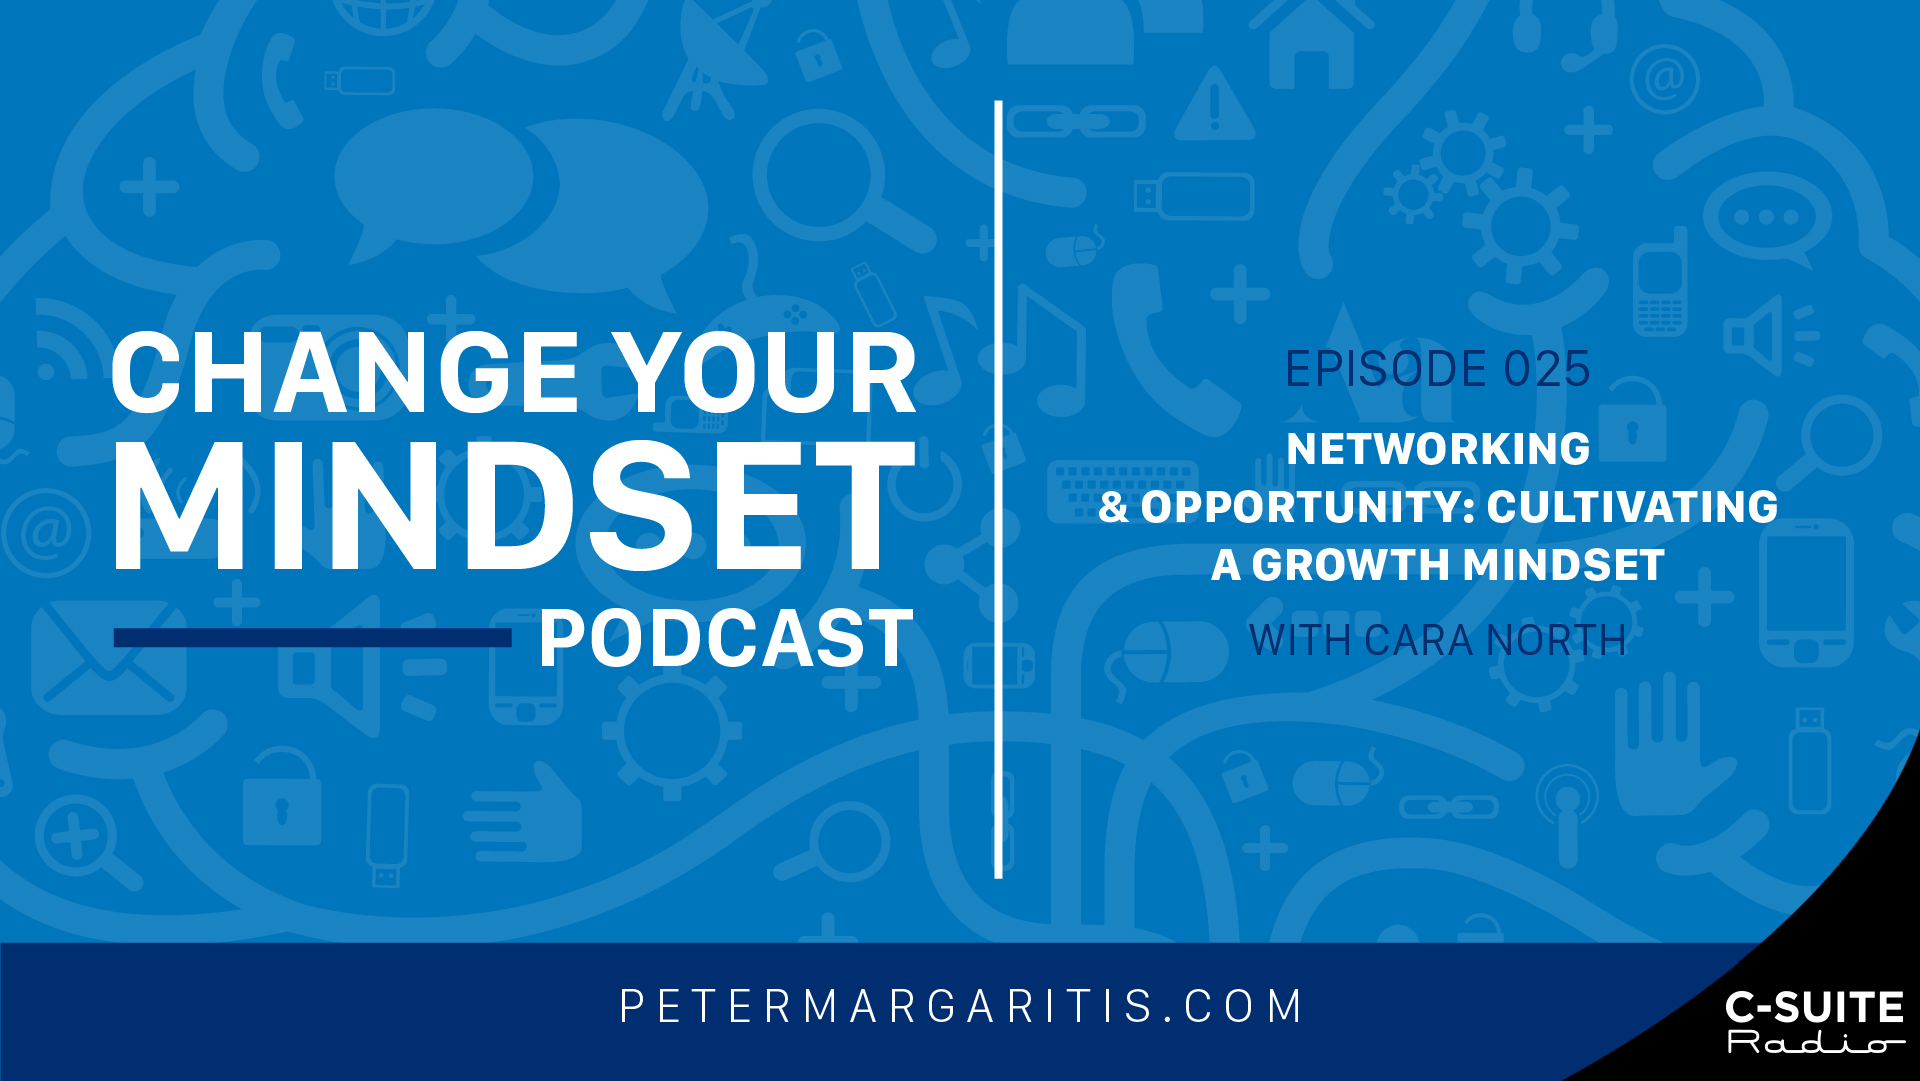 Peter Margaritis The Accidental Accountant - s2e25 cara north networking opportunity cultivating a growth mindset